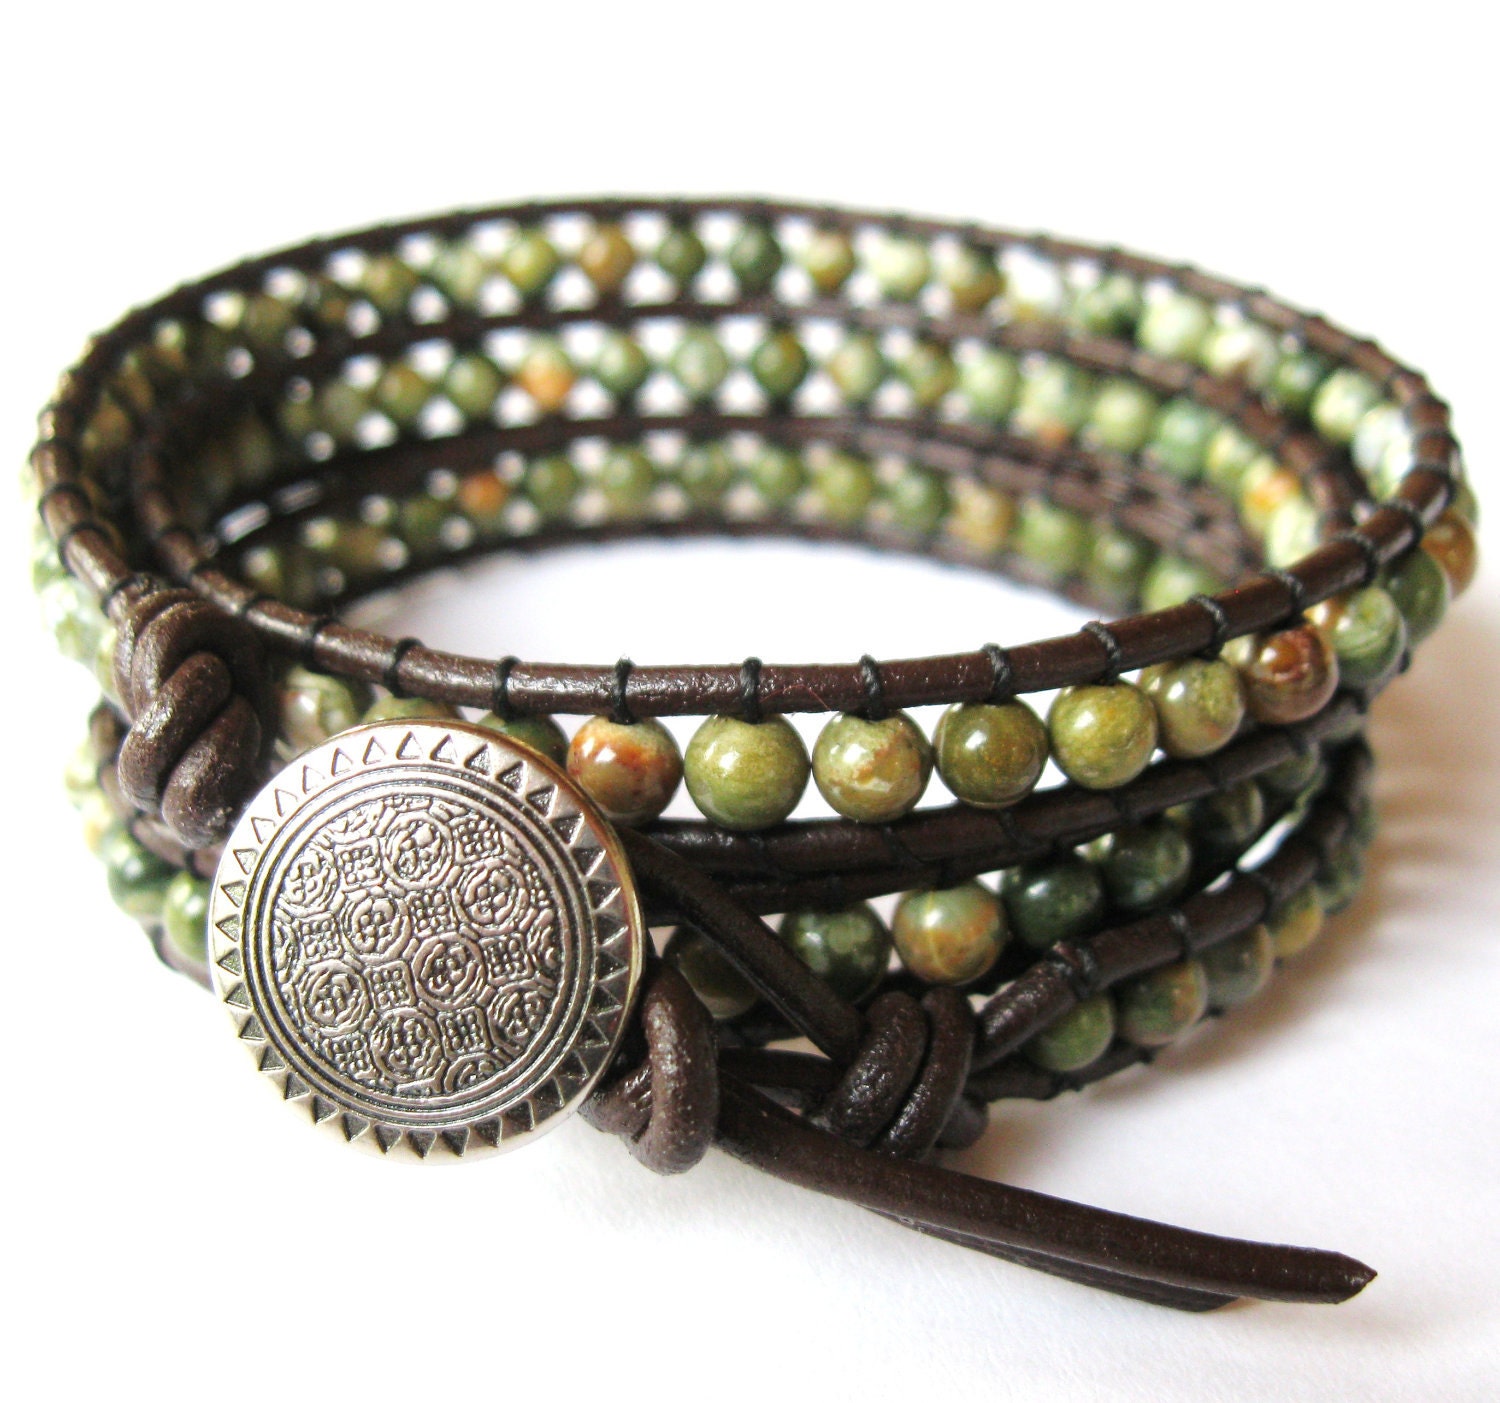 Along The Nile - Triple Wrap Ryolite on Leather.